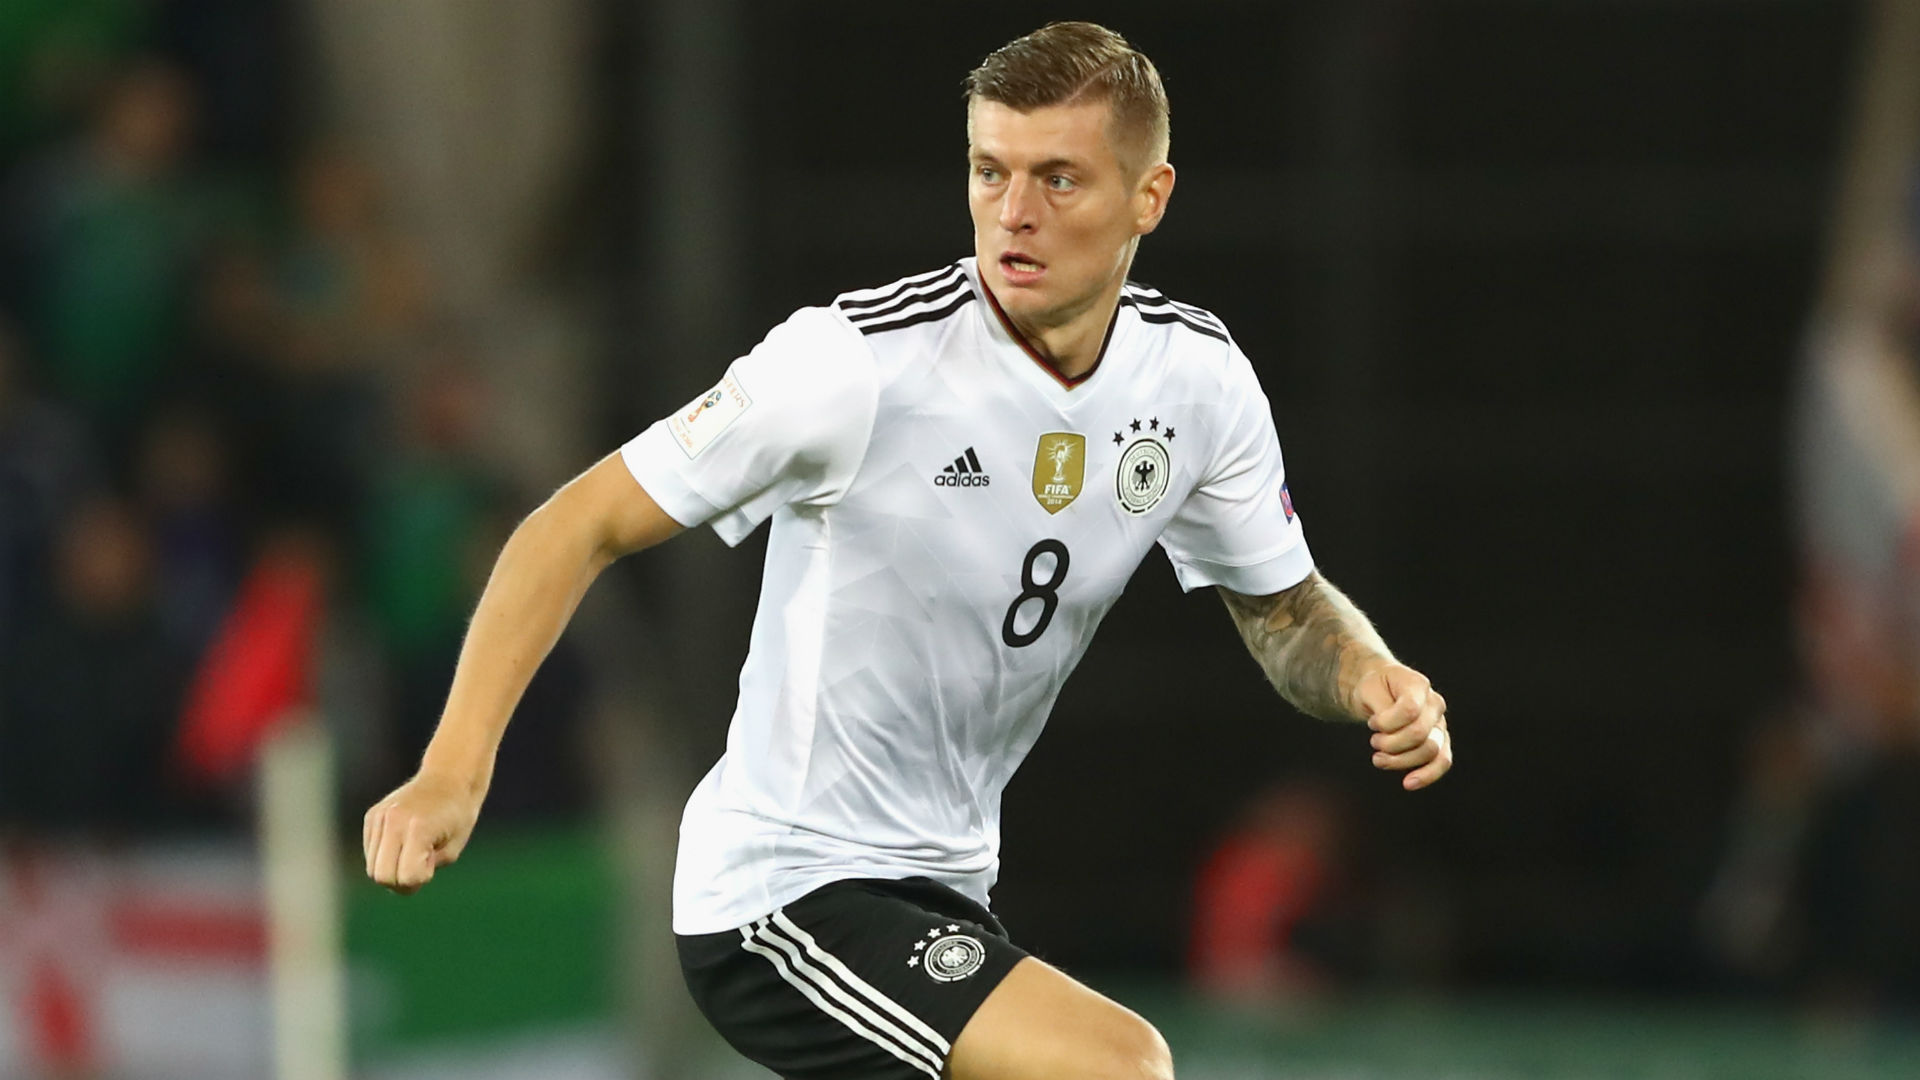 Toni Kroos Hd Wallpaper - Toni Kroos , HD Wallpaper & Backgrounds